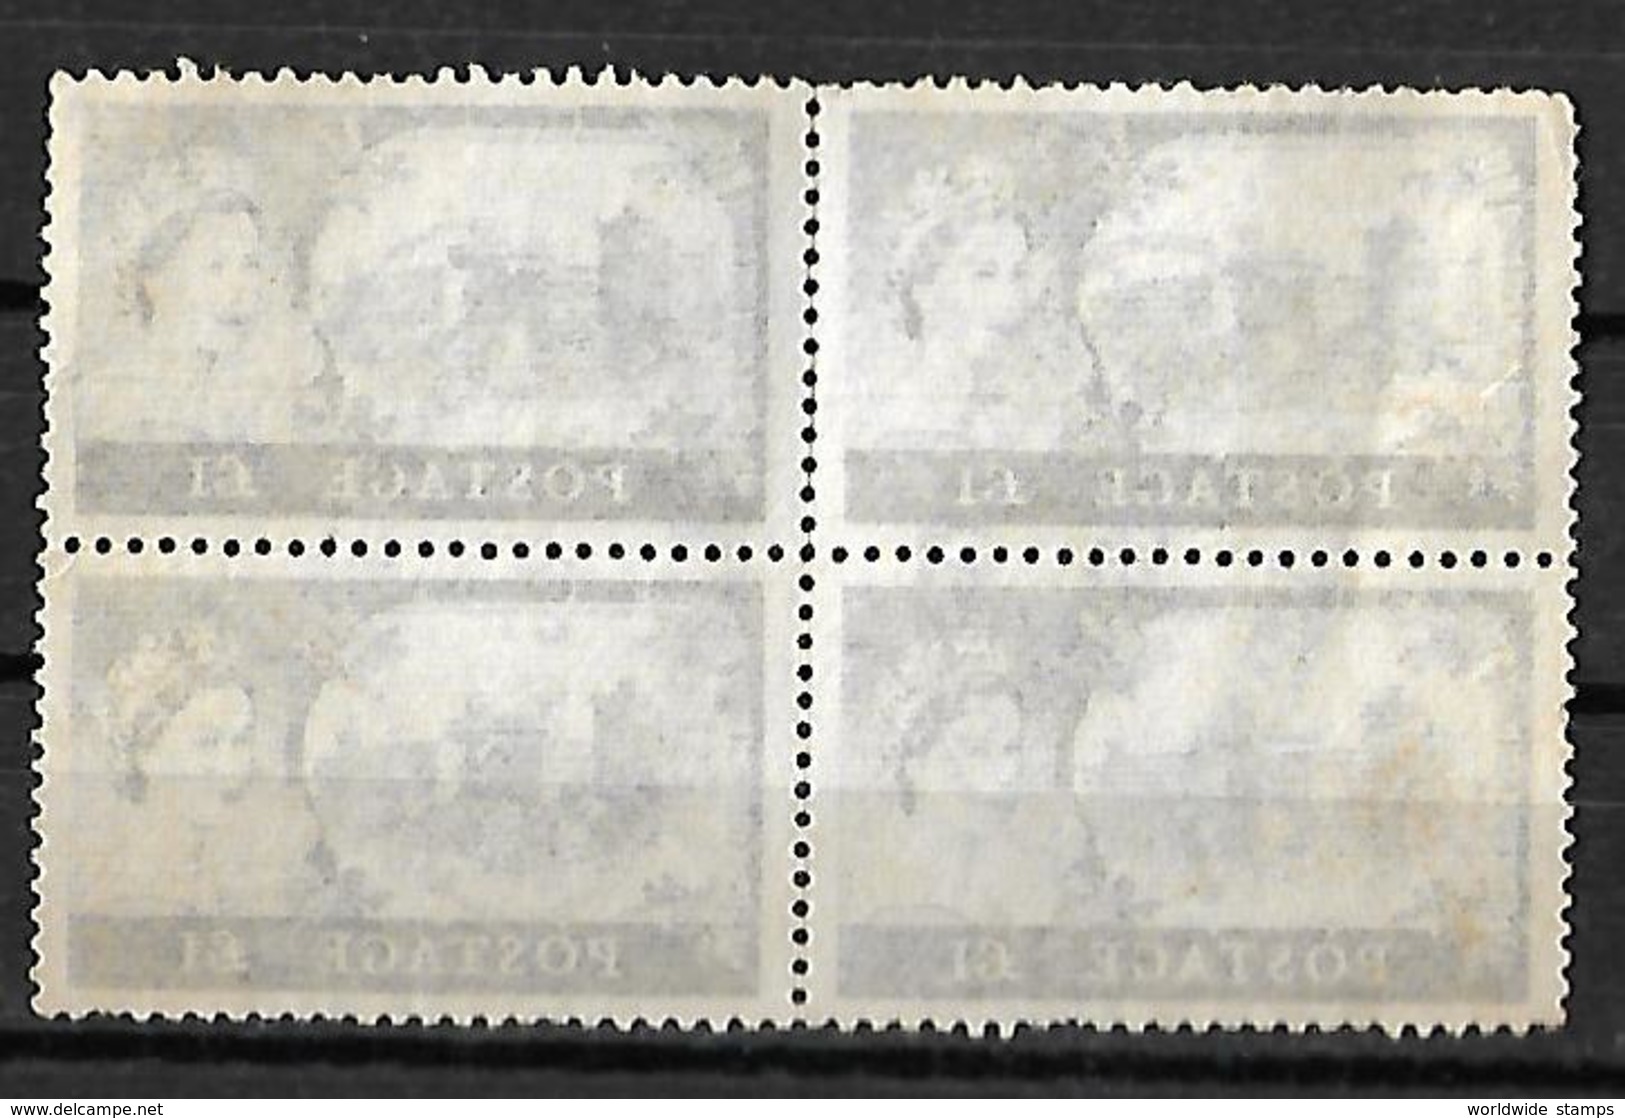 Great Britain 1959 £1 Wilding Castle  Block Of 4 England  High Value Used Stamps - Unused Stamps